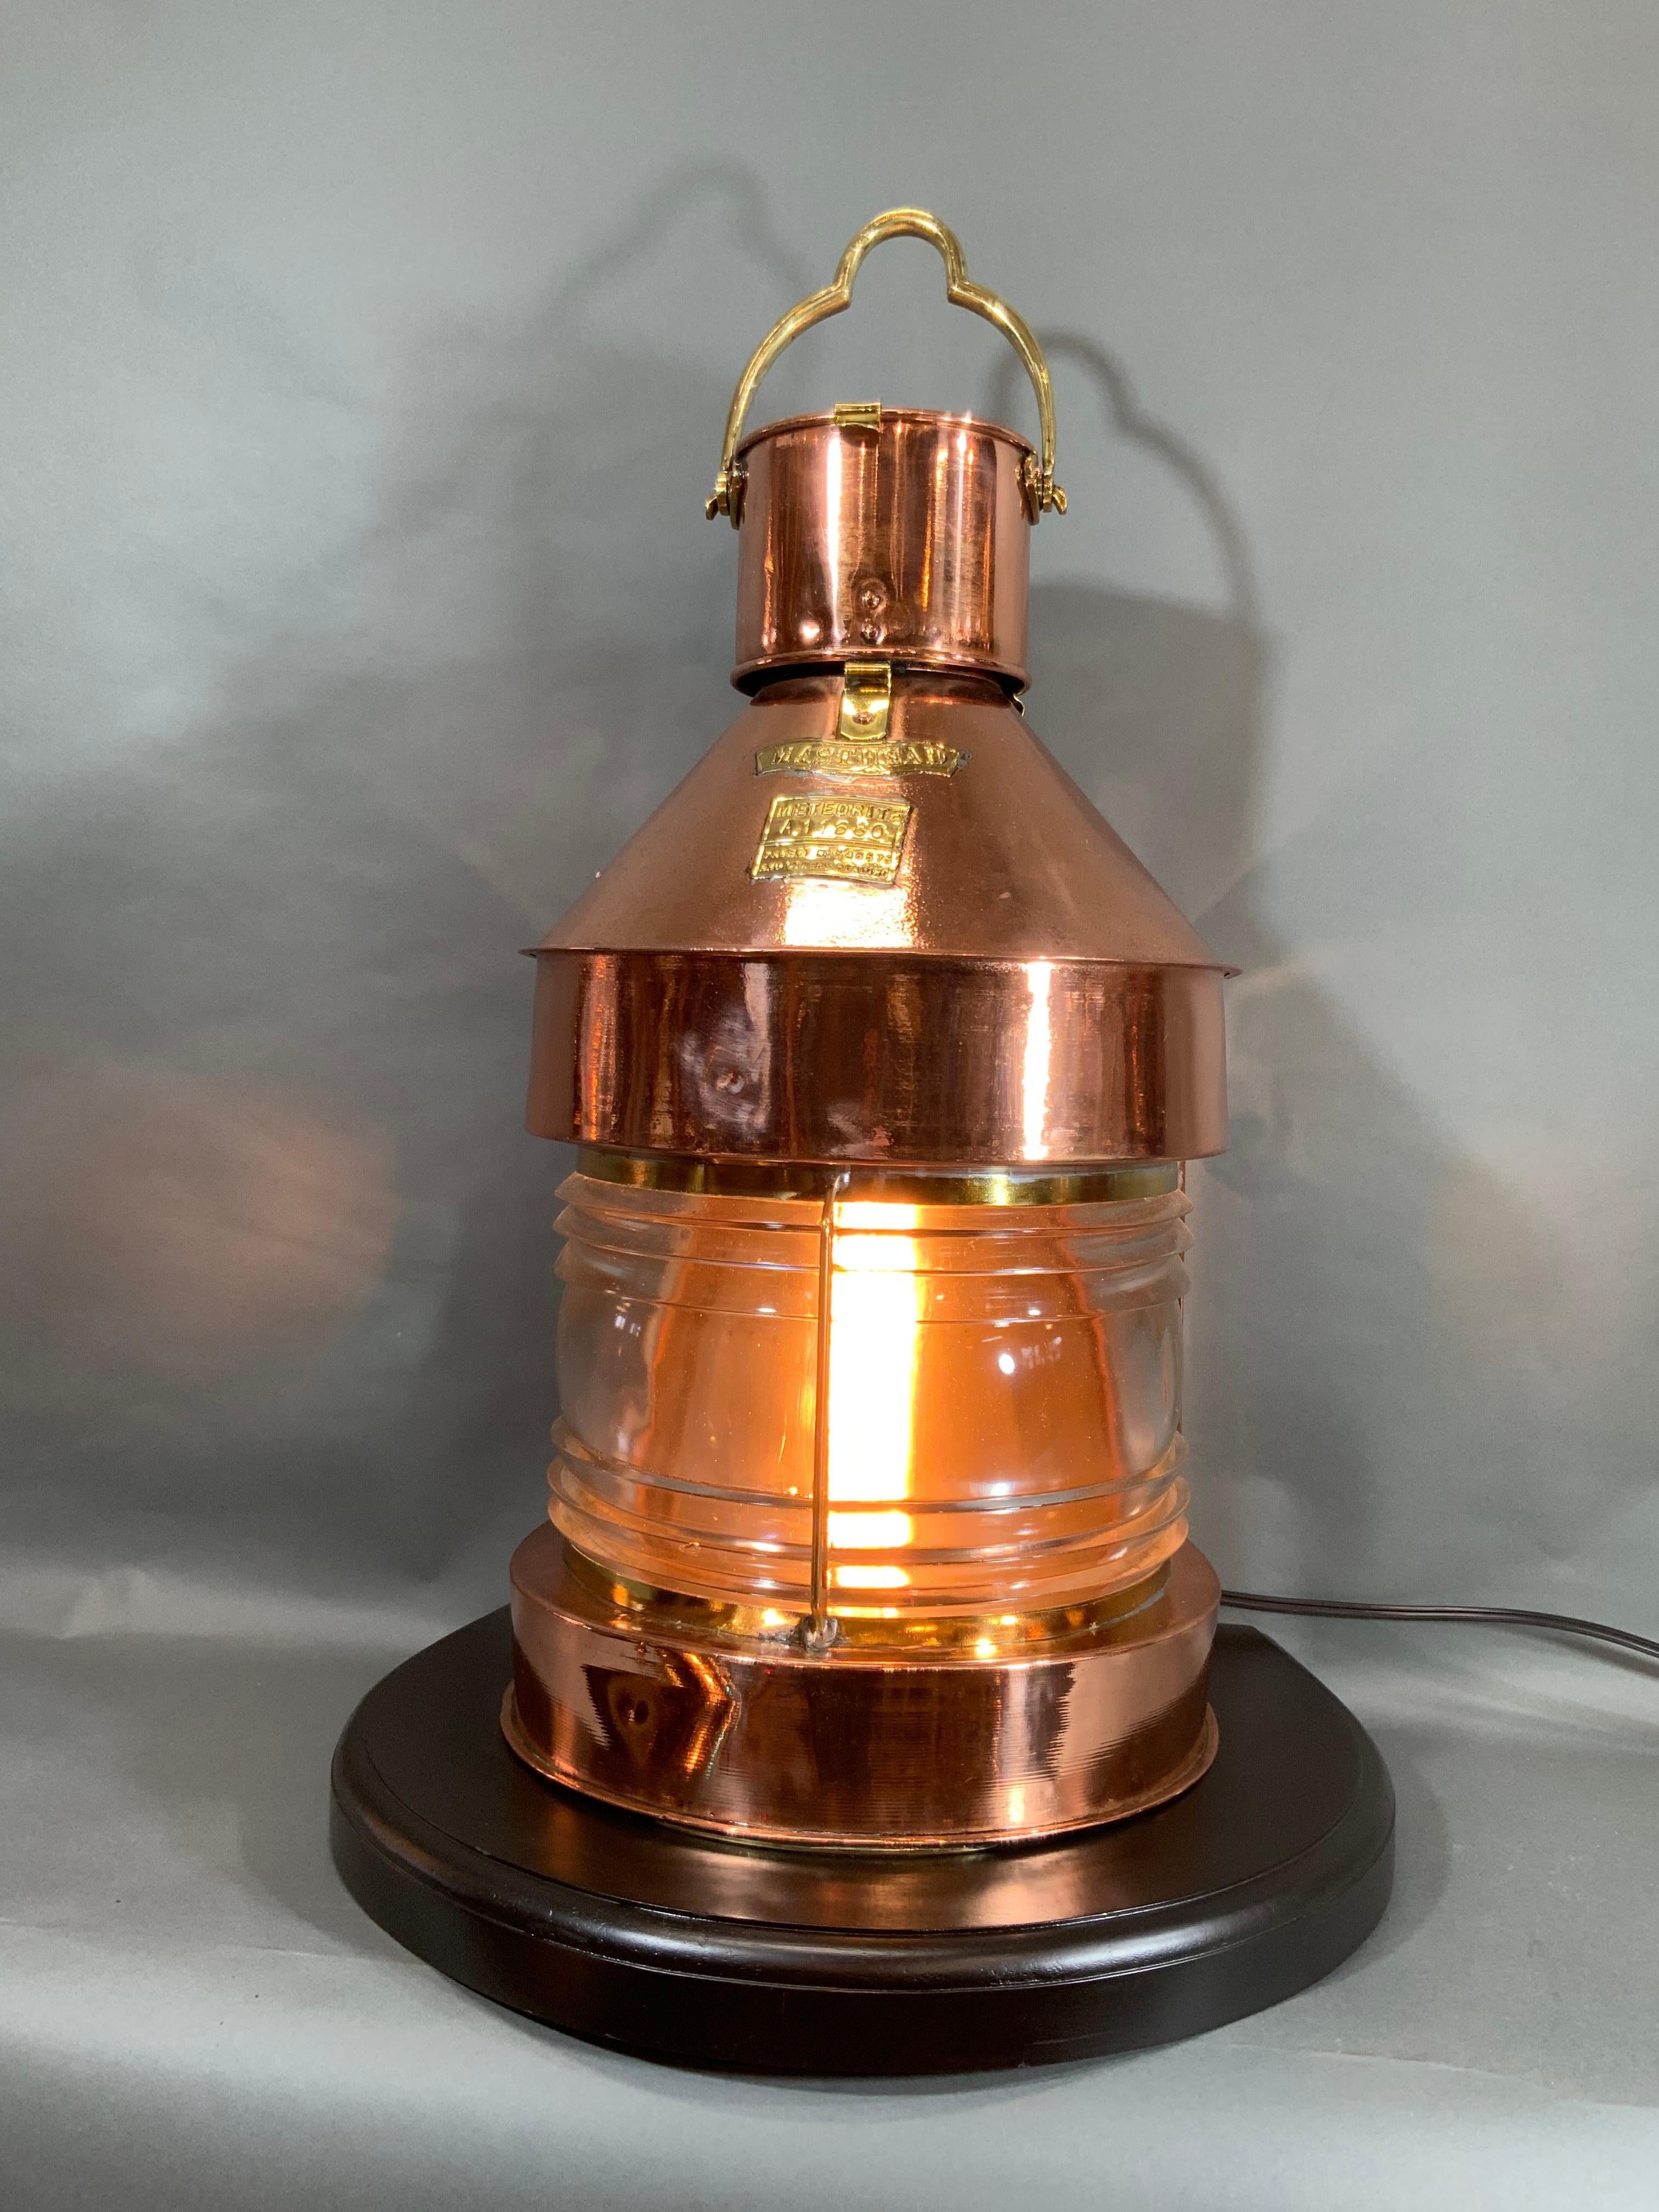 Solid copper and brass ships masthead lantern by the venerable English firm Meteorite. With brass makers badge and serial number. Interior has been fitted with an electric socket but also comes with the oil unit. Mounted to a thick mahogany base.